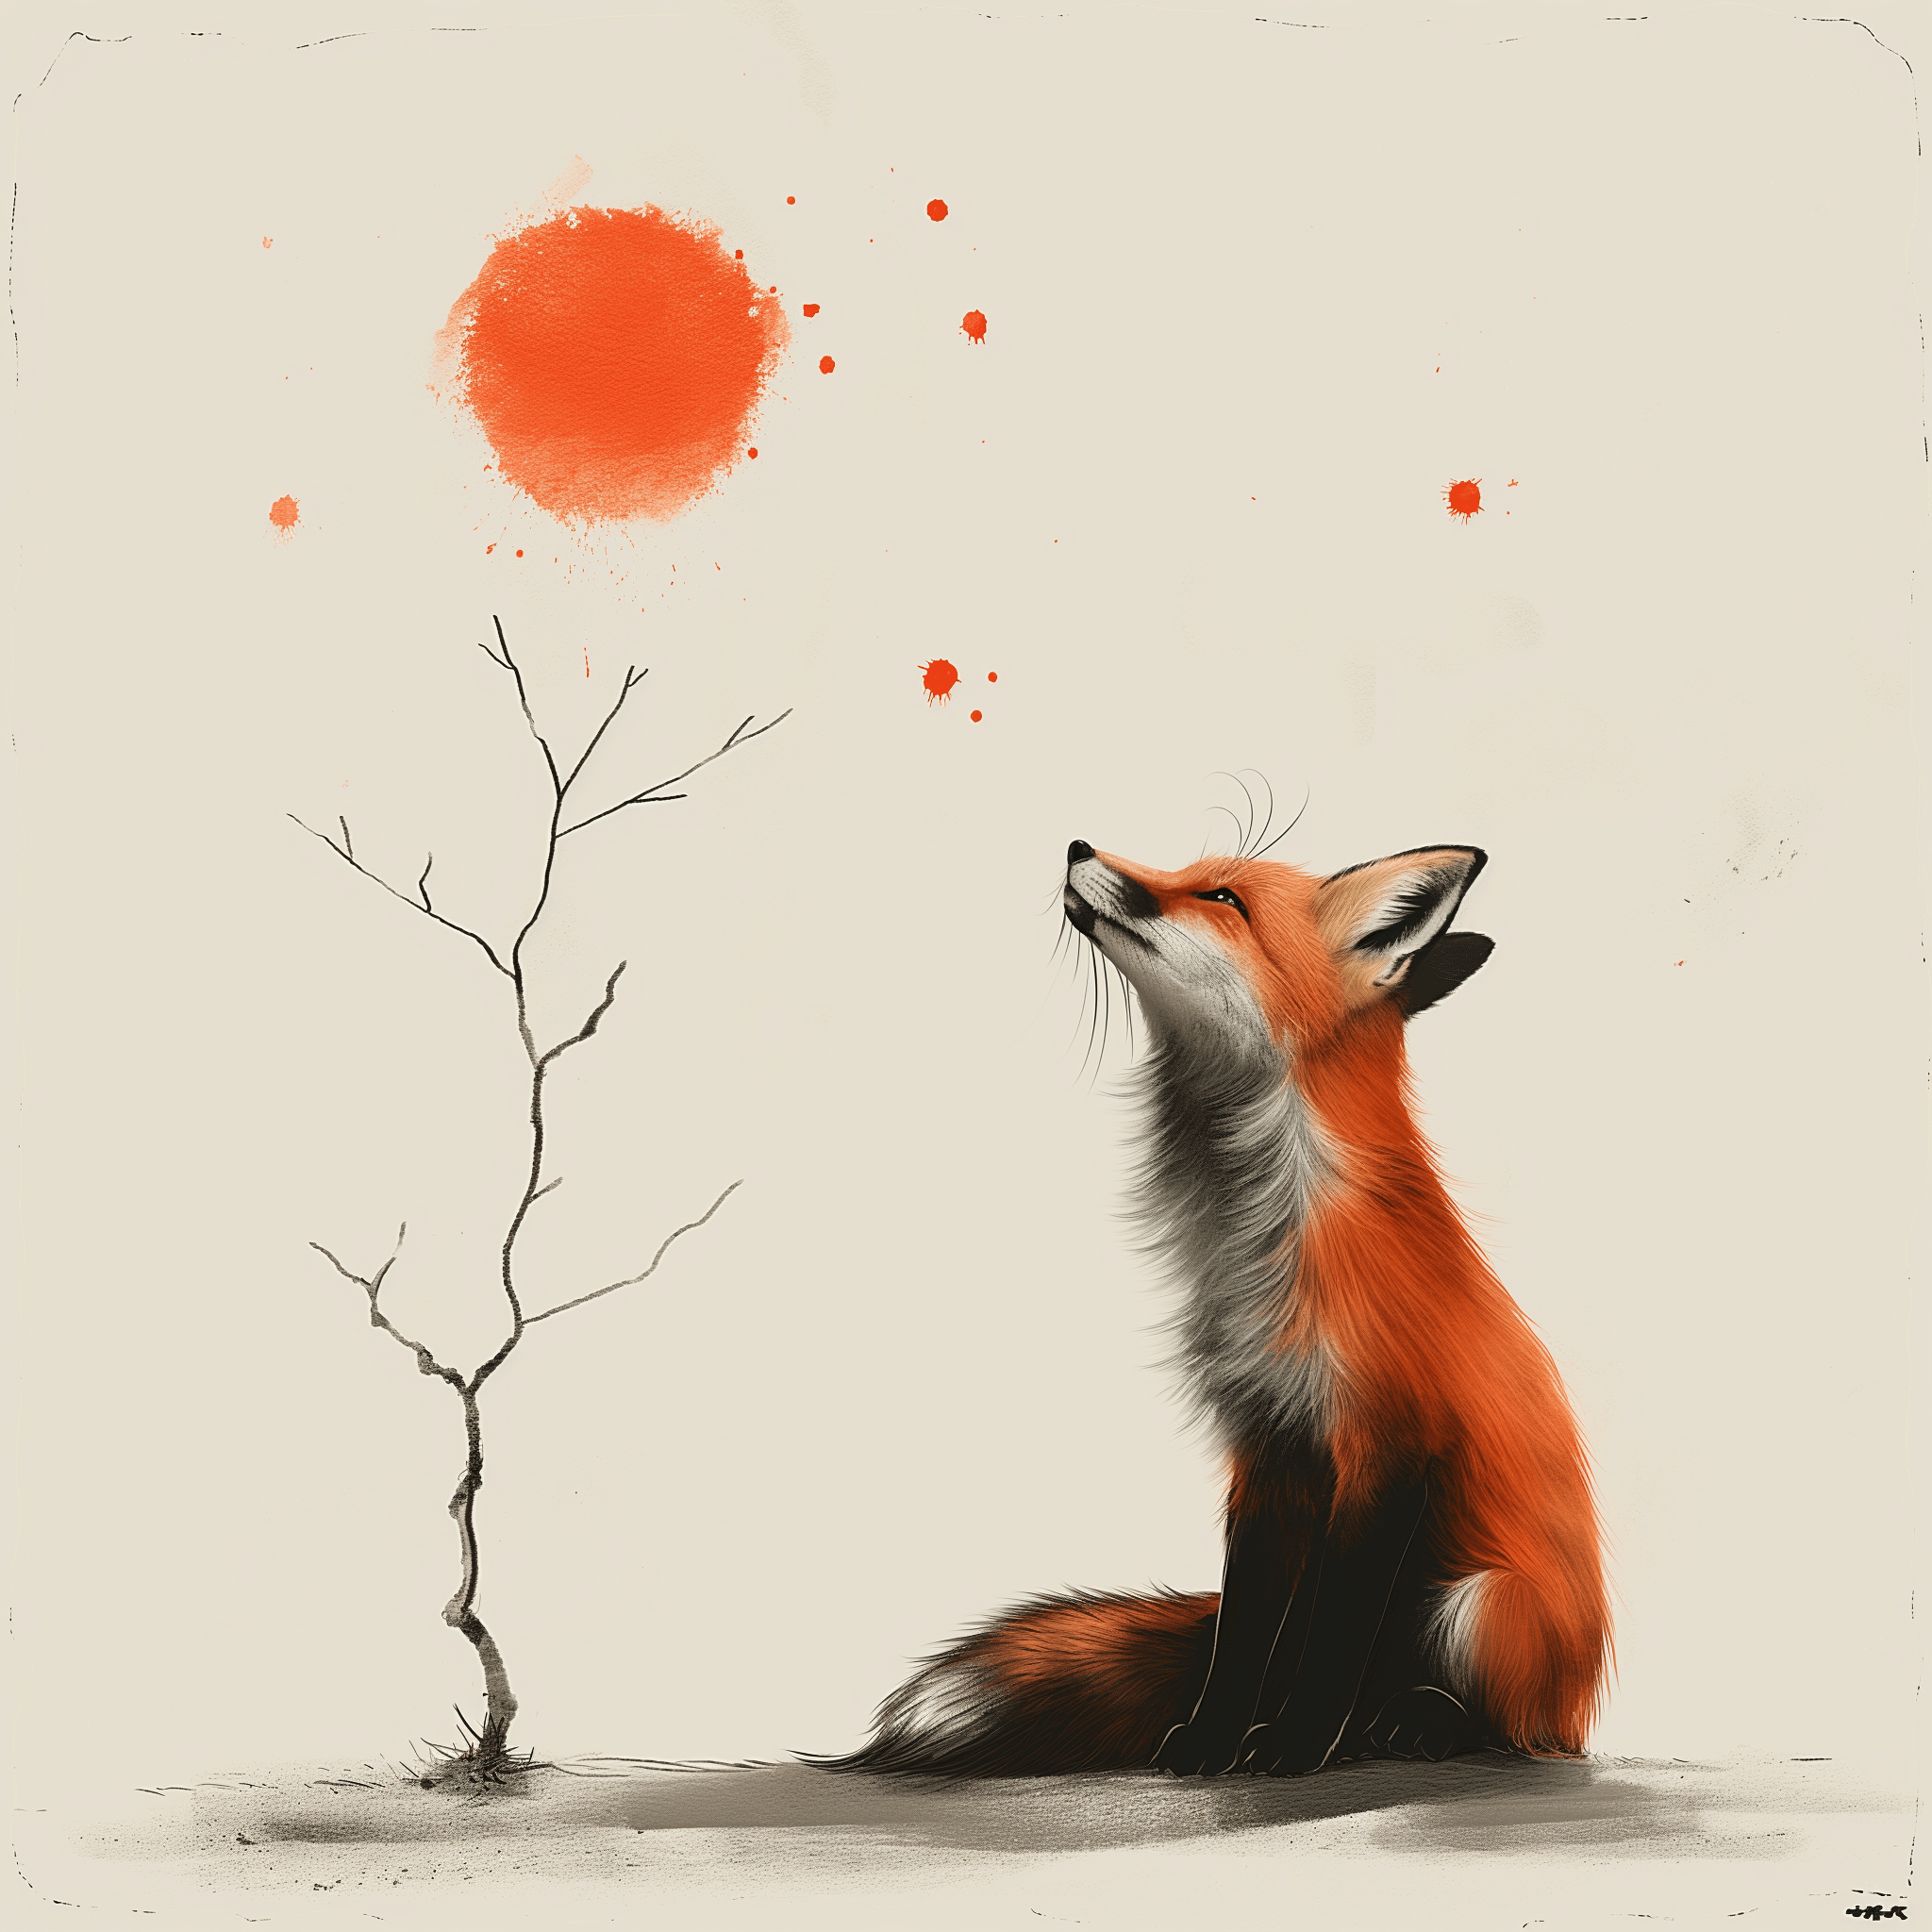 focx a fox is overthinking about his existence in style by Lim 775fdc29 e0f0 47e3 b7cd 6e84f81ff62b - FOCX